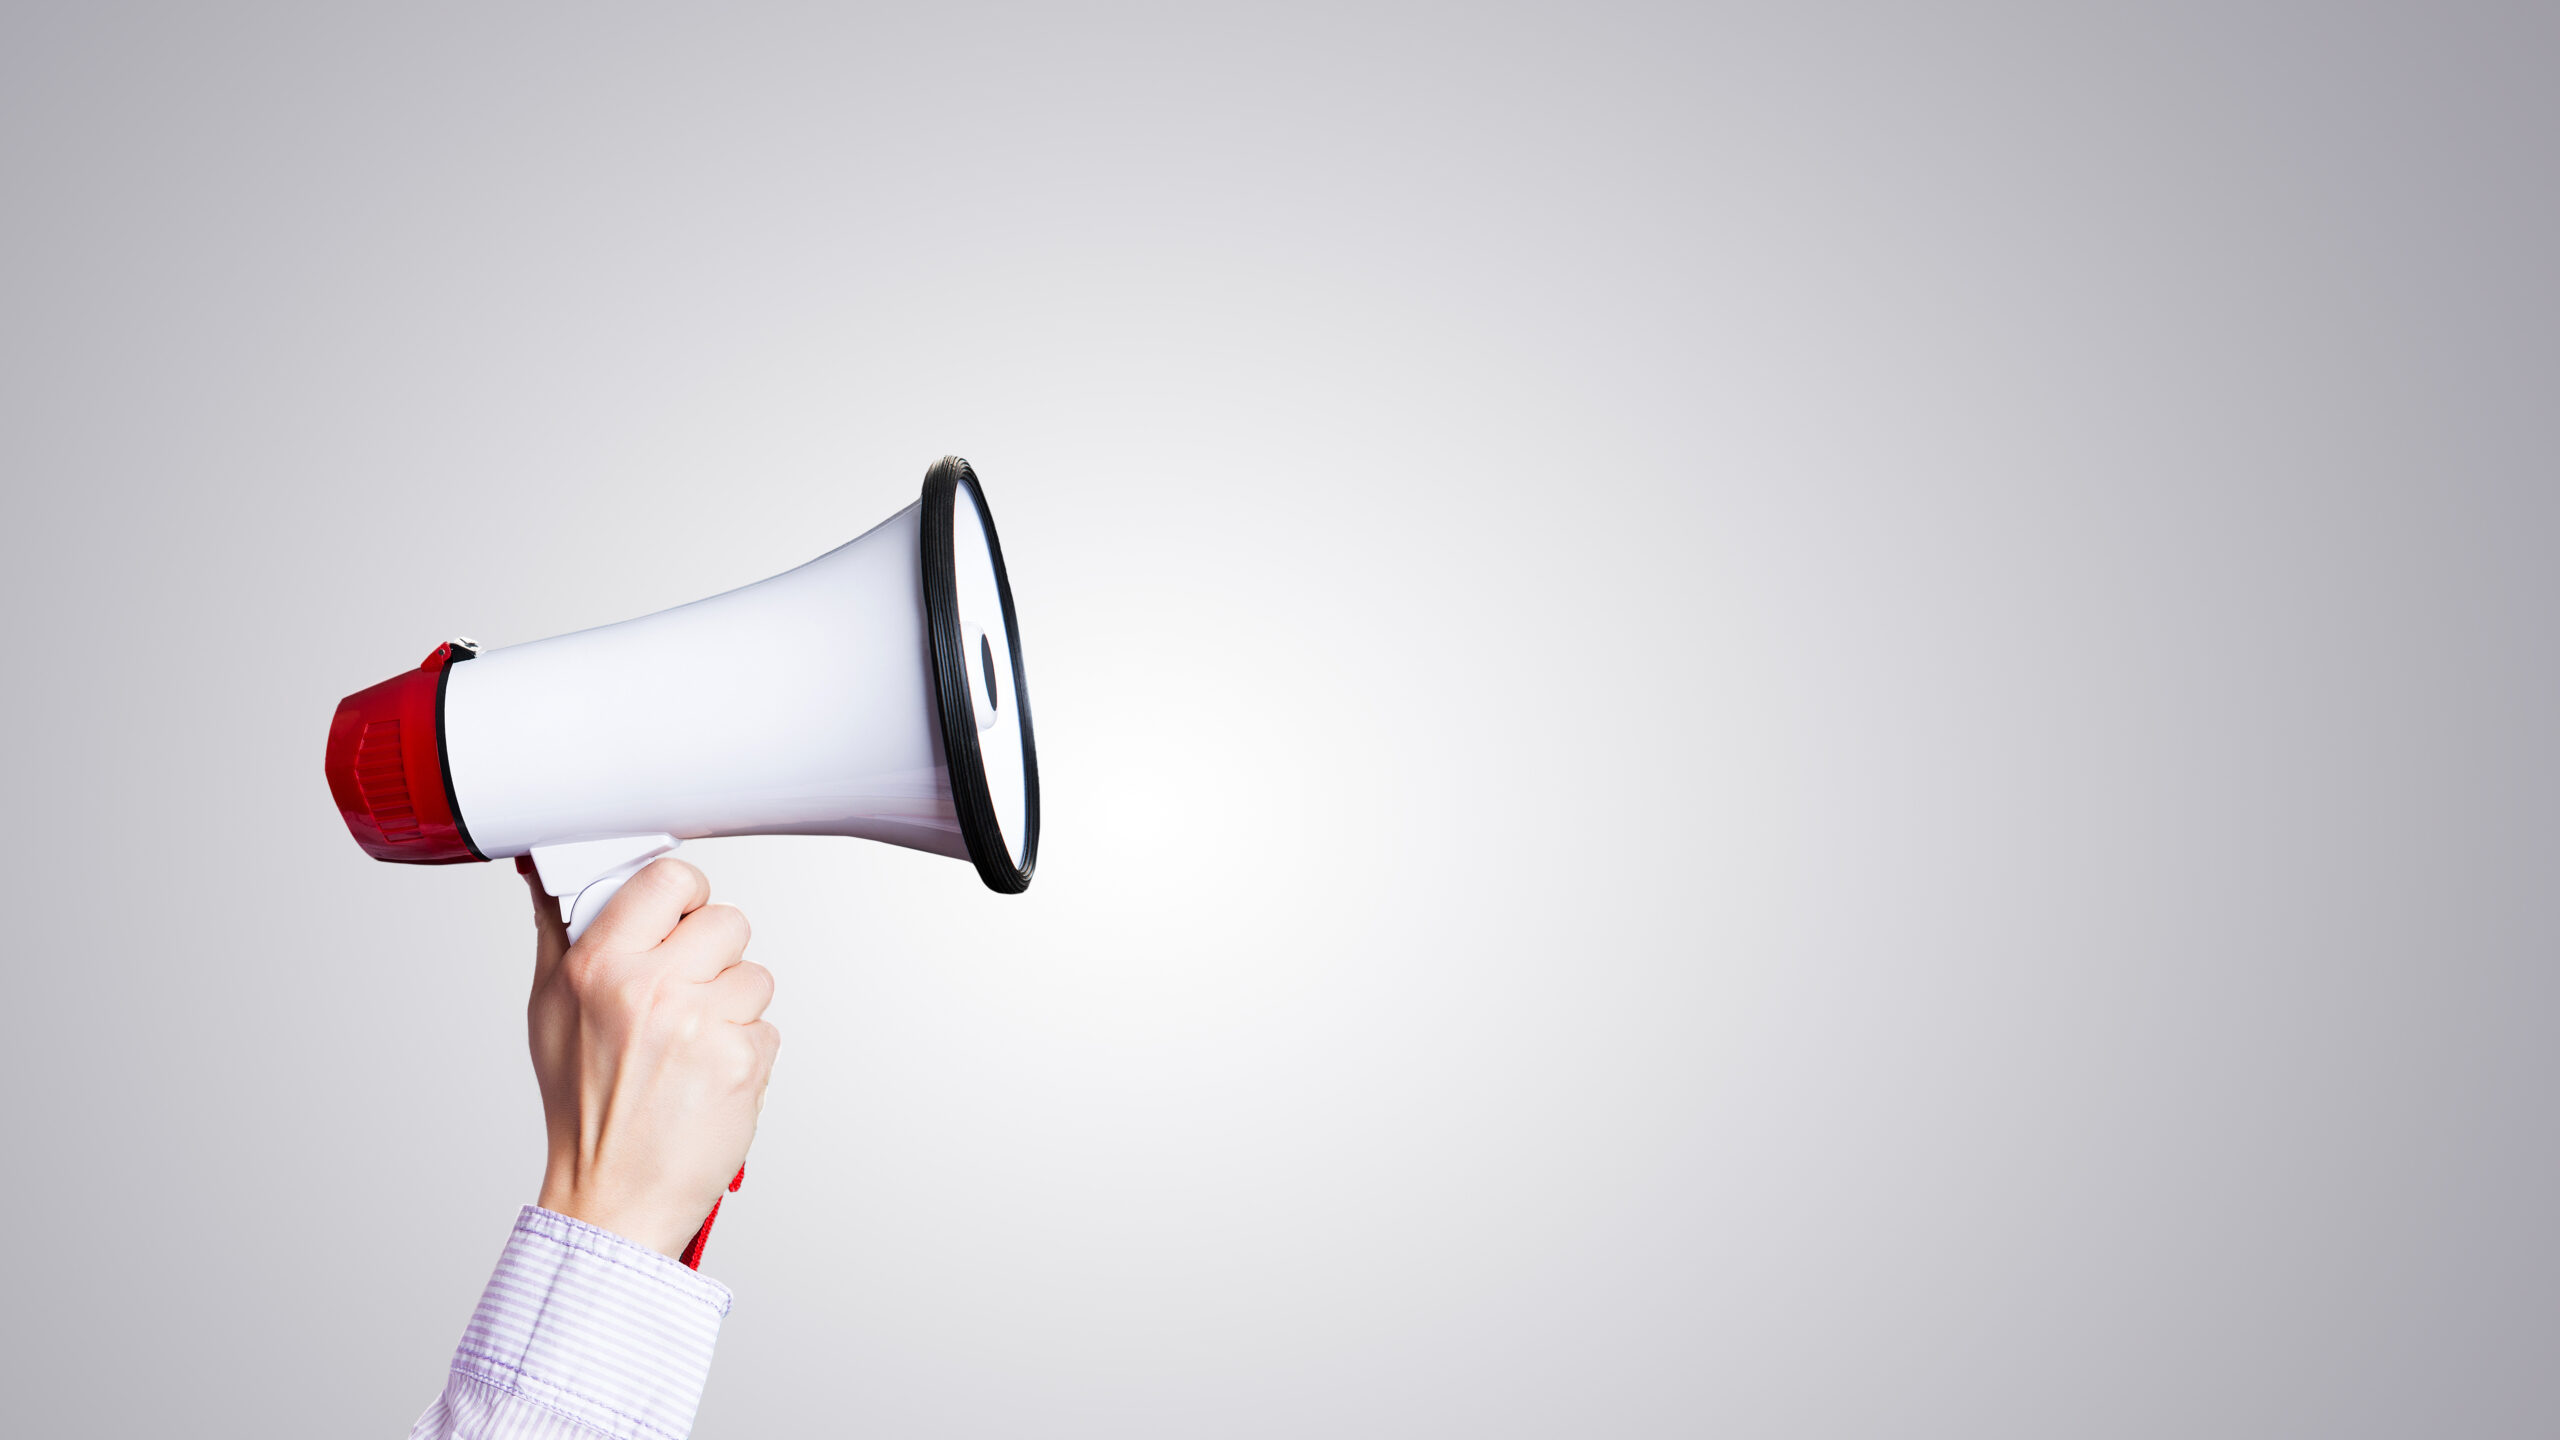 A megaphone is held up in front of a blank white background.